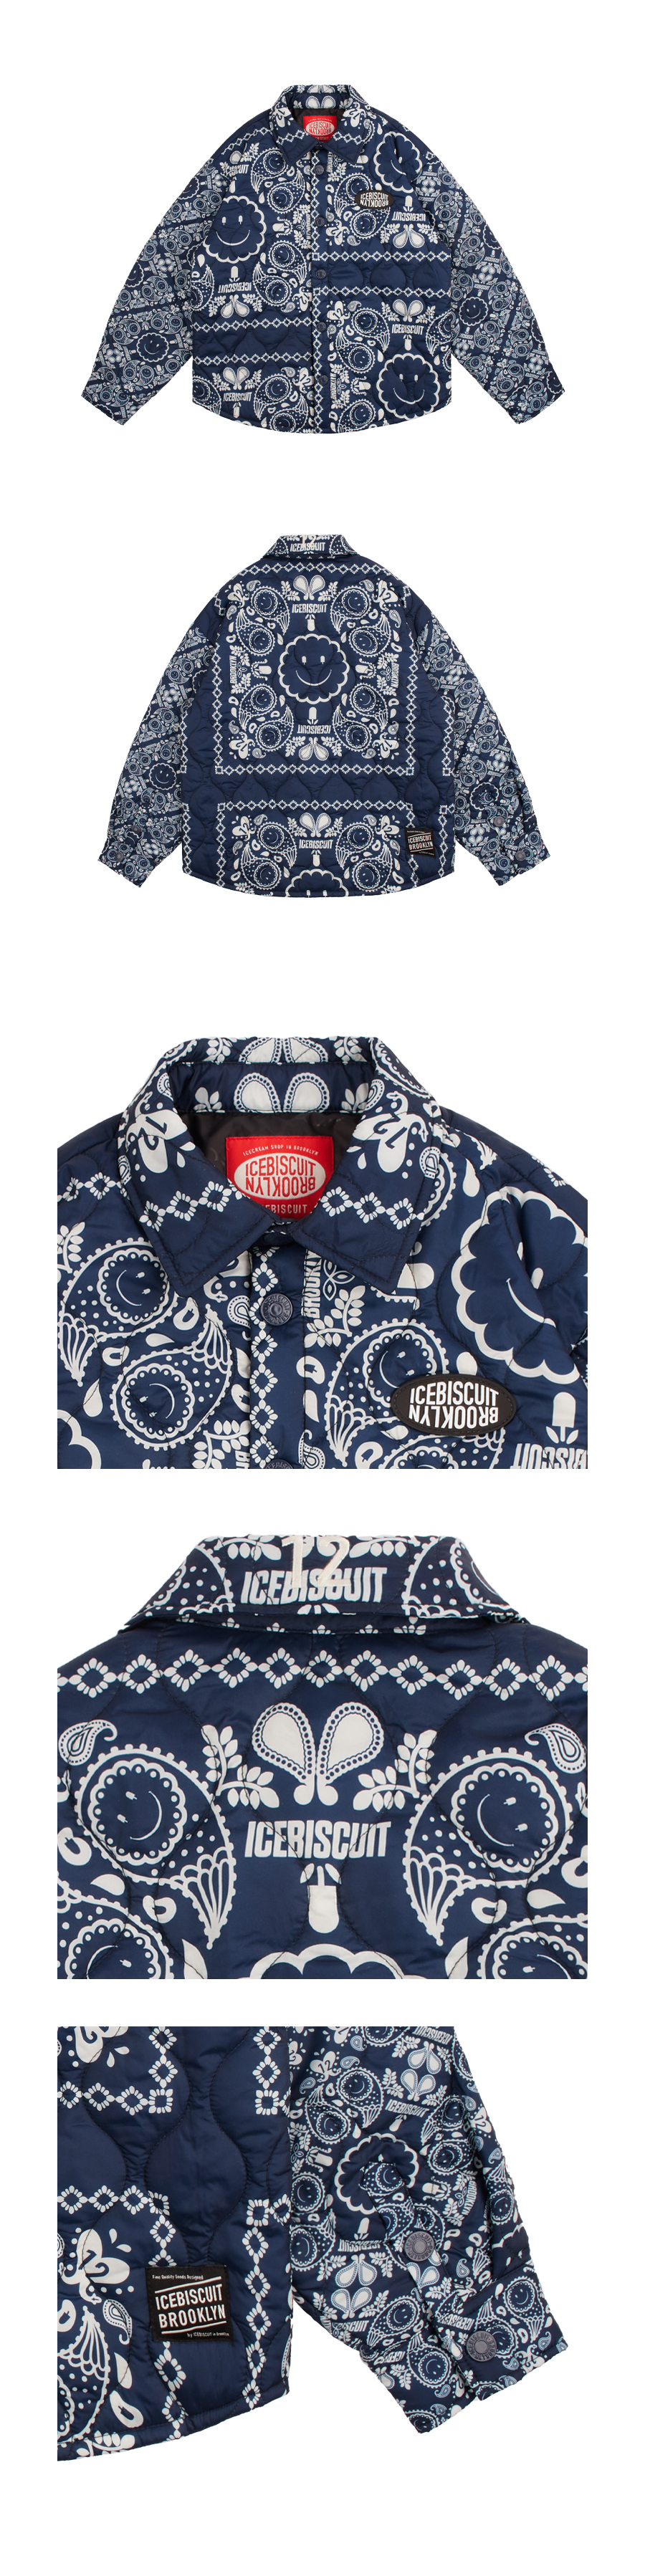 Smile paisley quilted shirt 상세 이미지